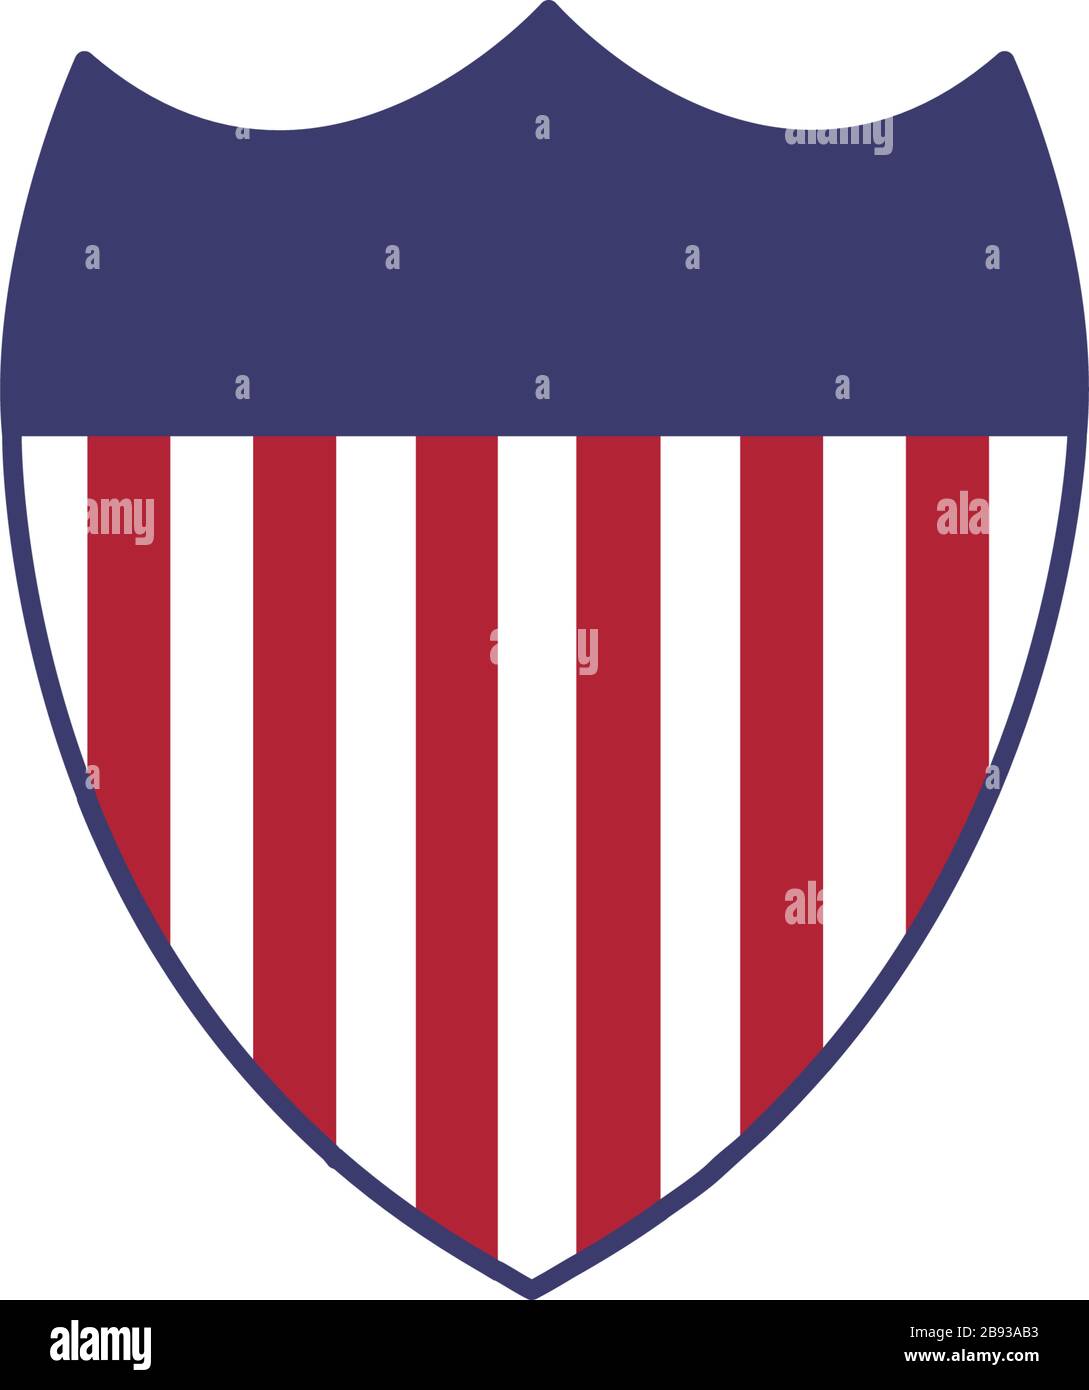 American flag national shield emblem. Stock Vector illustration isolated on white background. Stock Vector